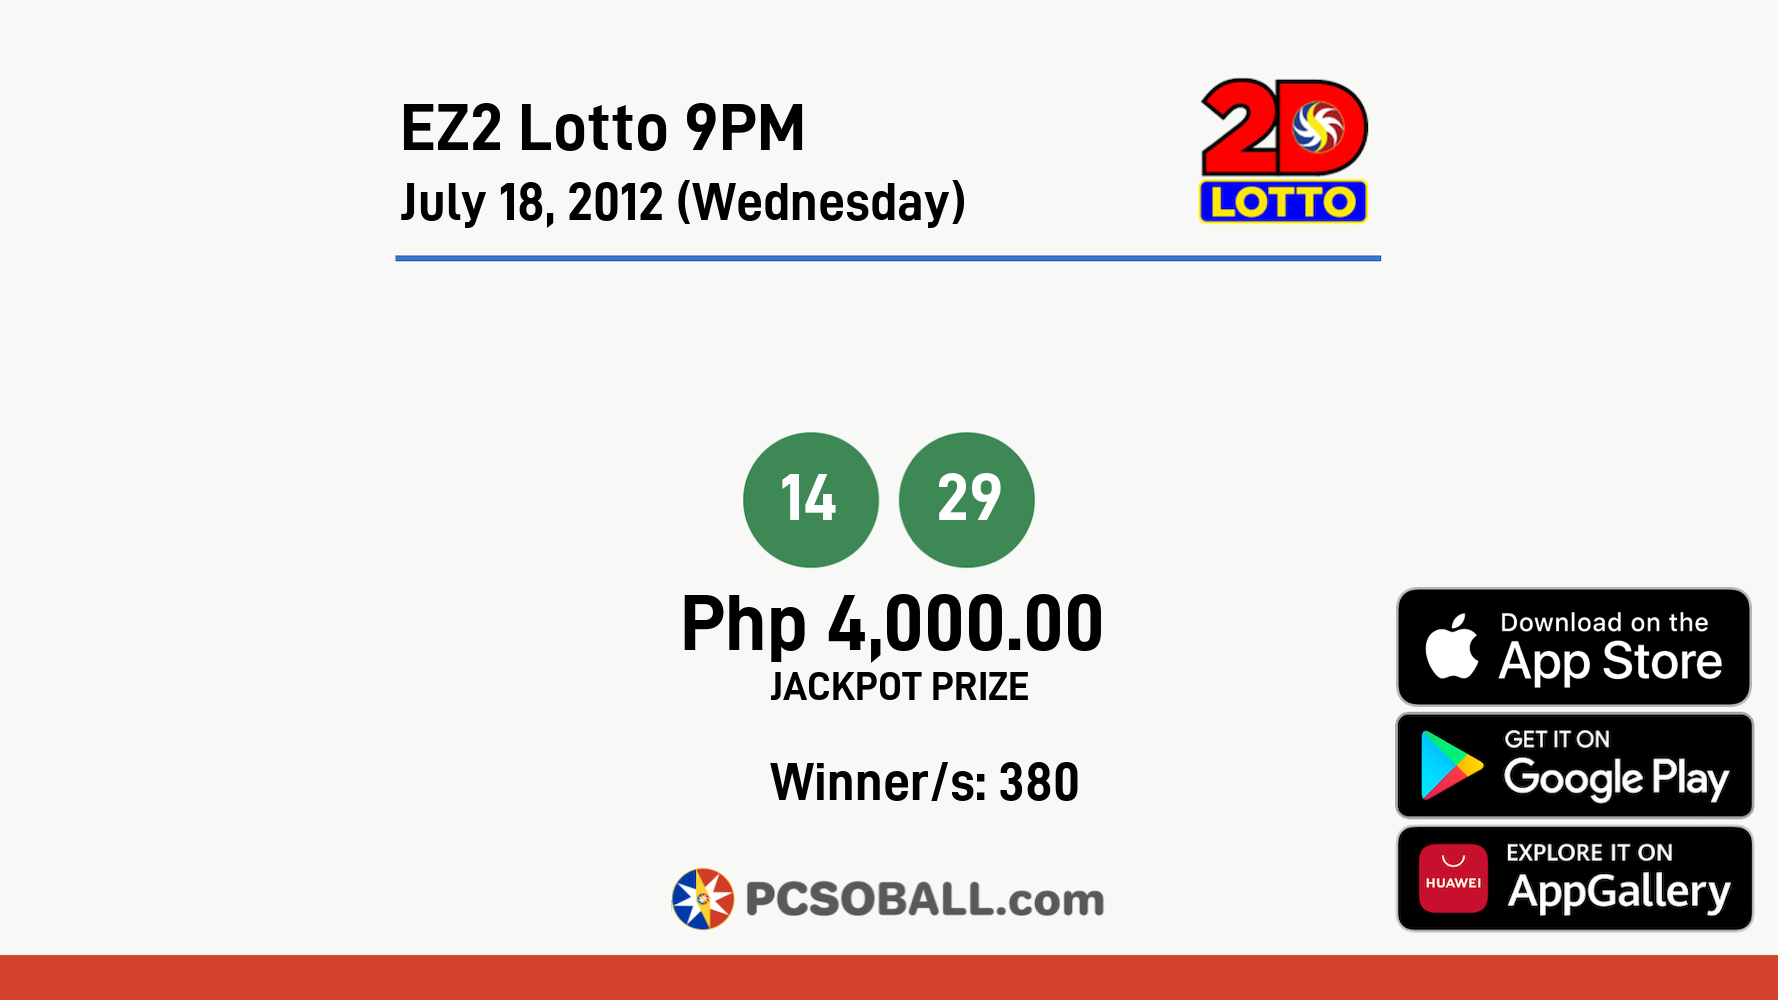 EZ2 Lotto 9PM July 18, 2012 (Wednesday) Result